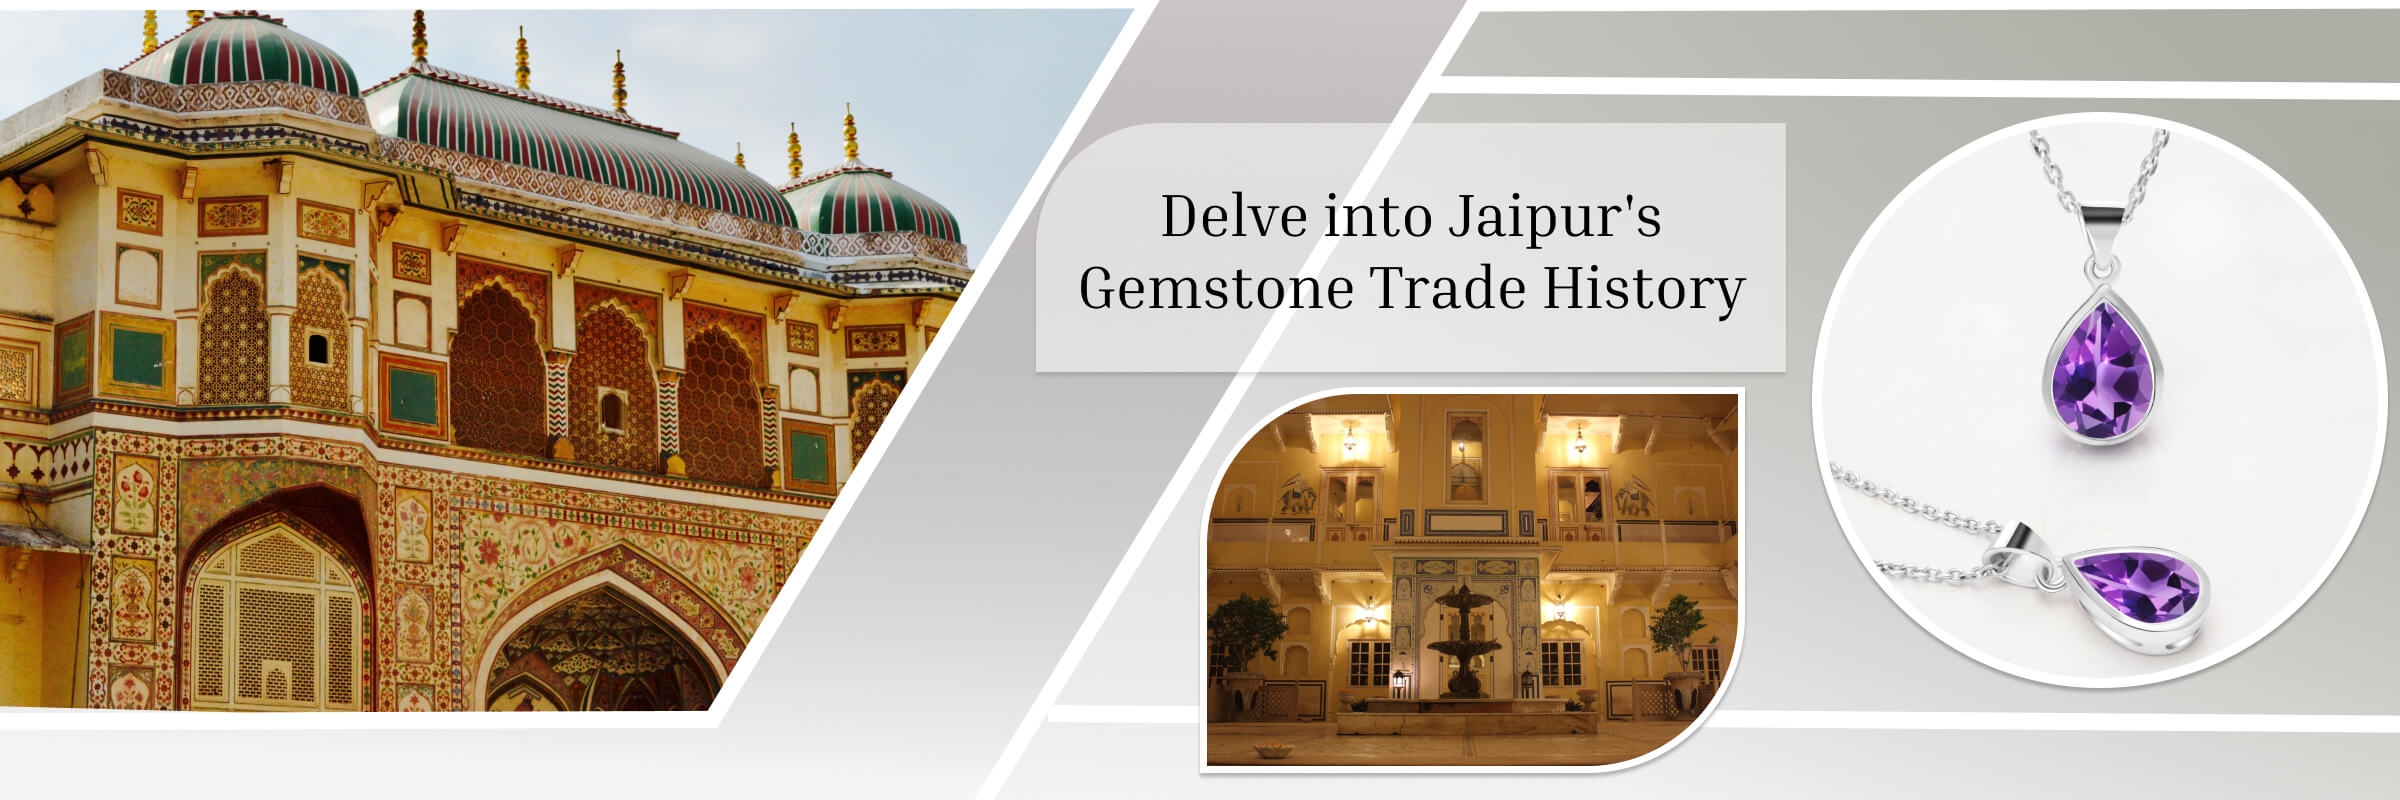 History of Jaipur Silver and Gemstone Trade